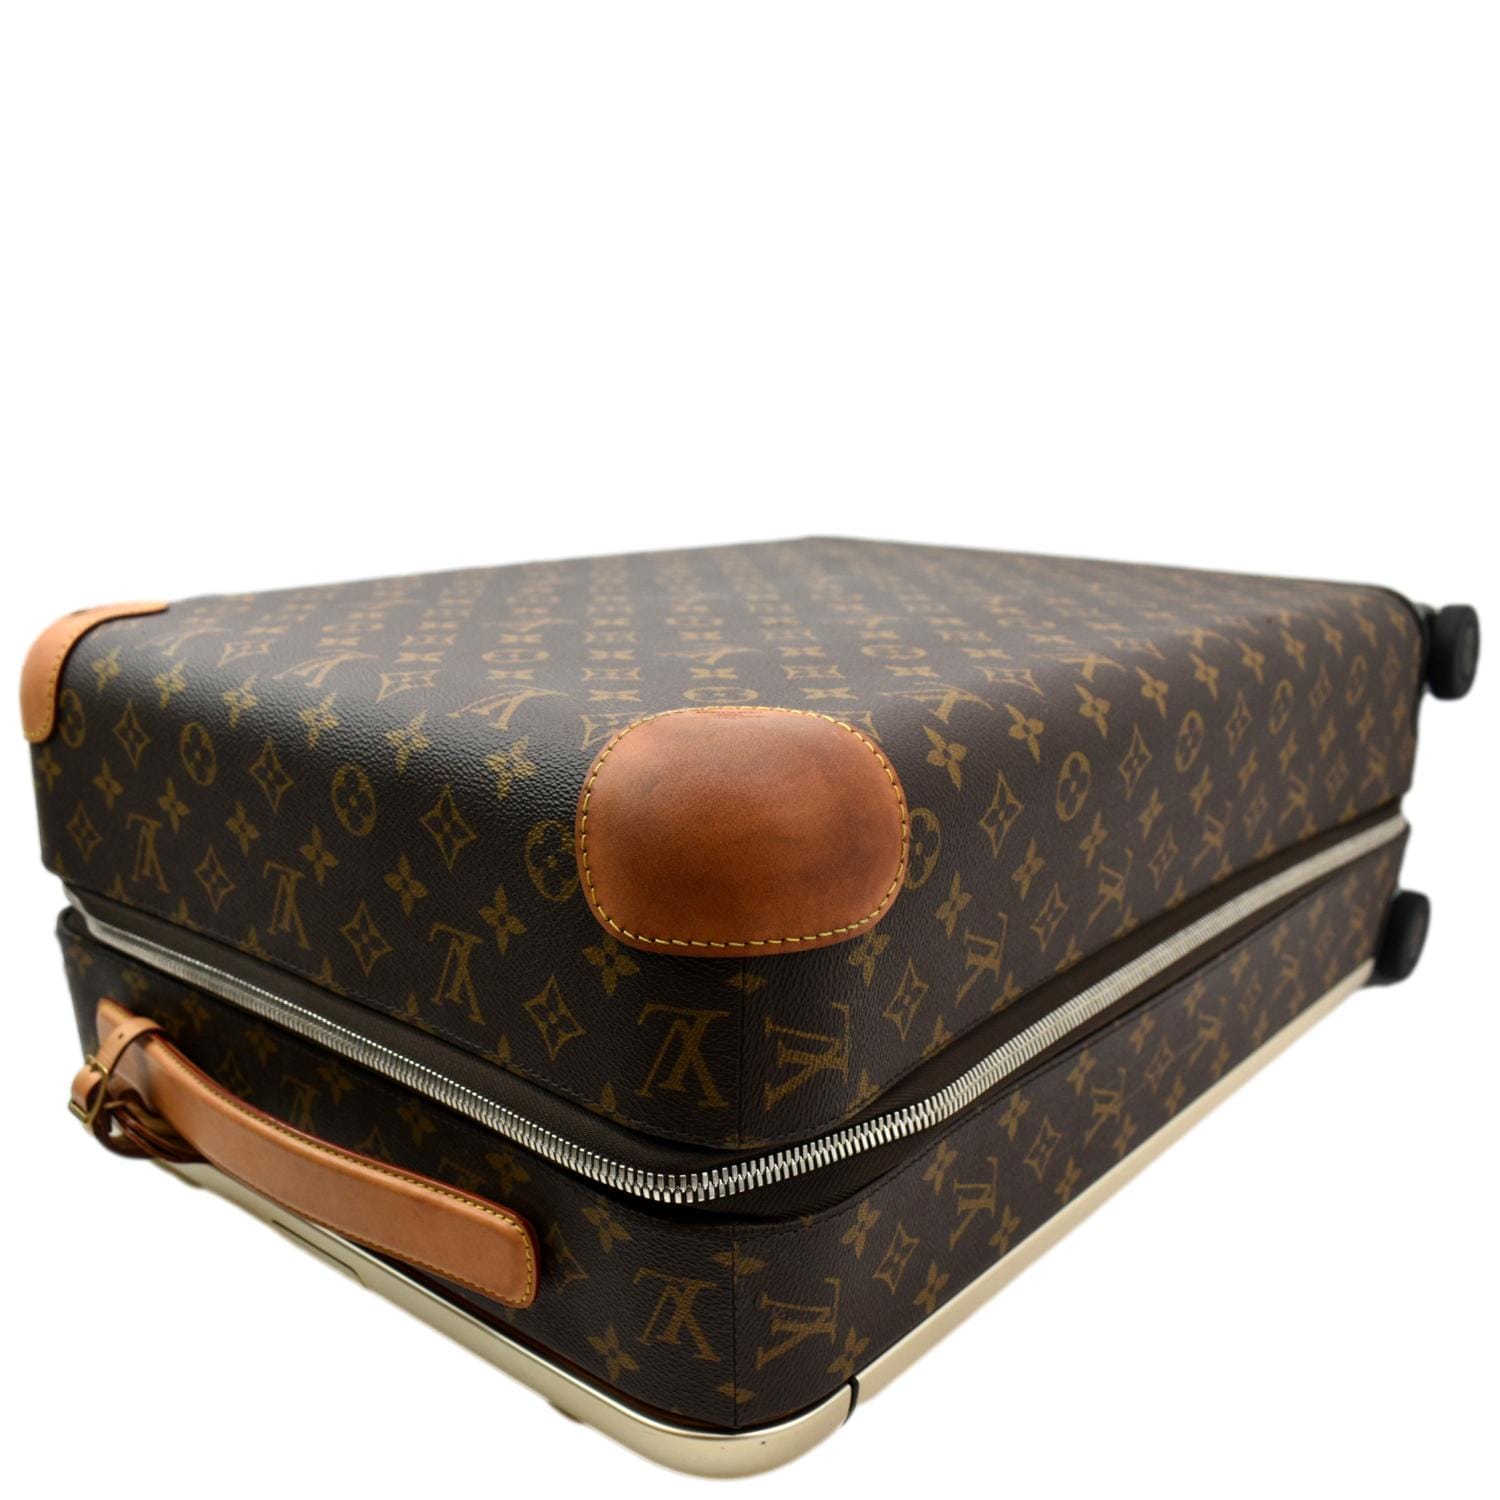 Horizon 55 leather travel bag Louis Vuitton Brown in Leather